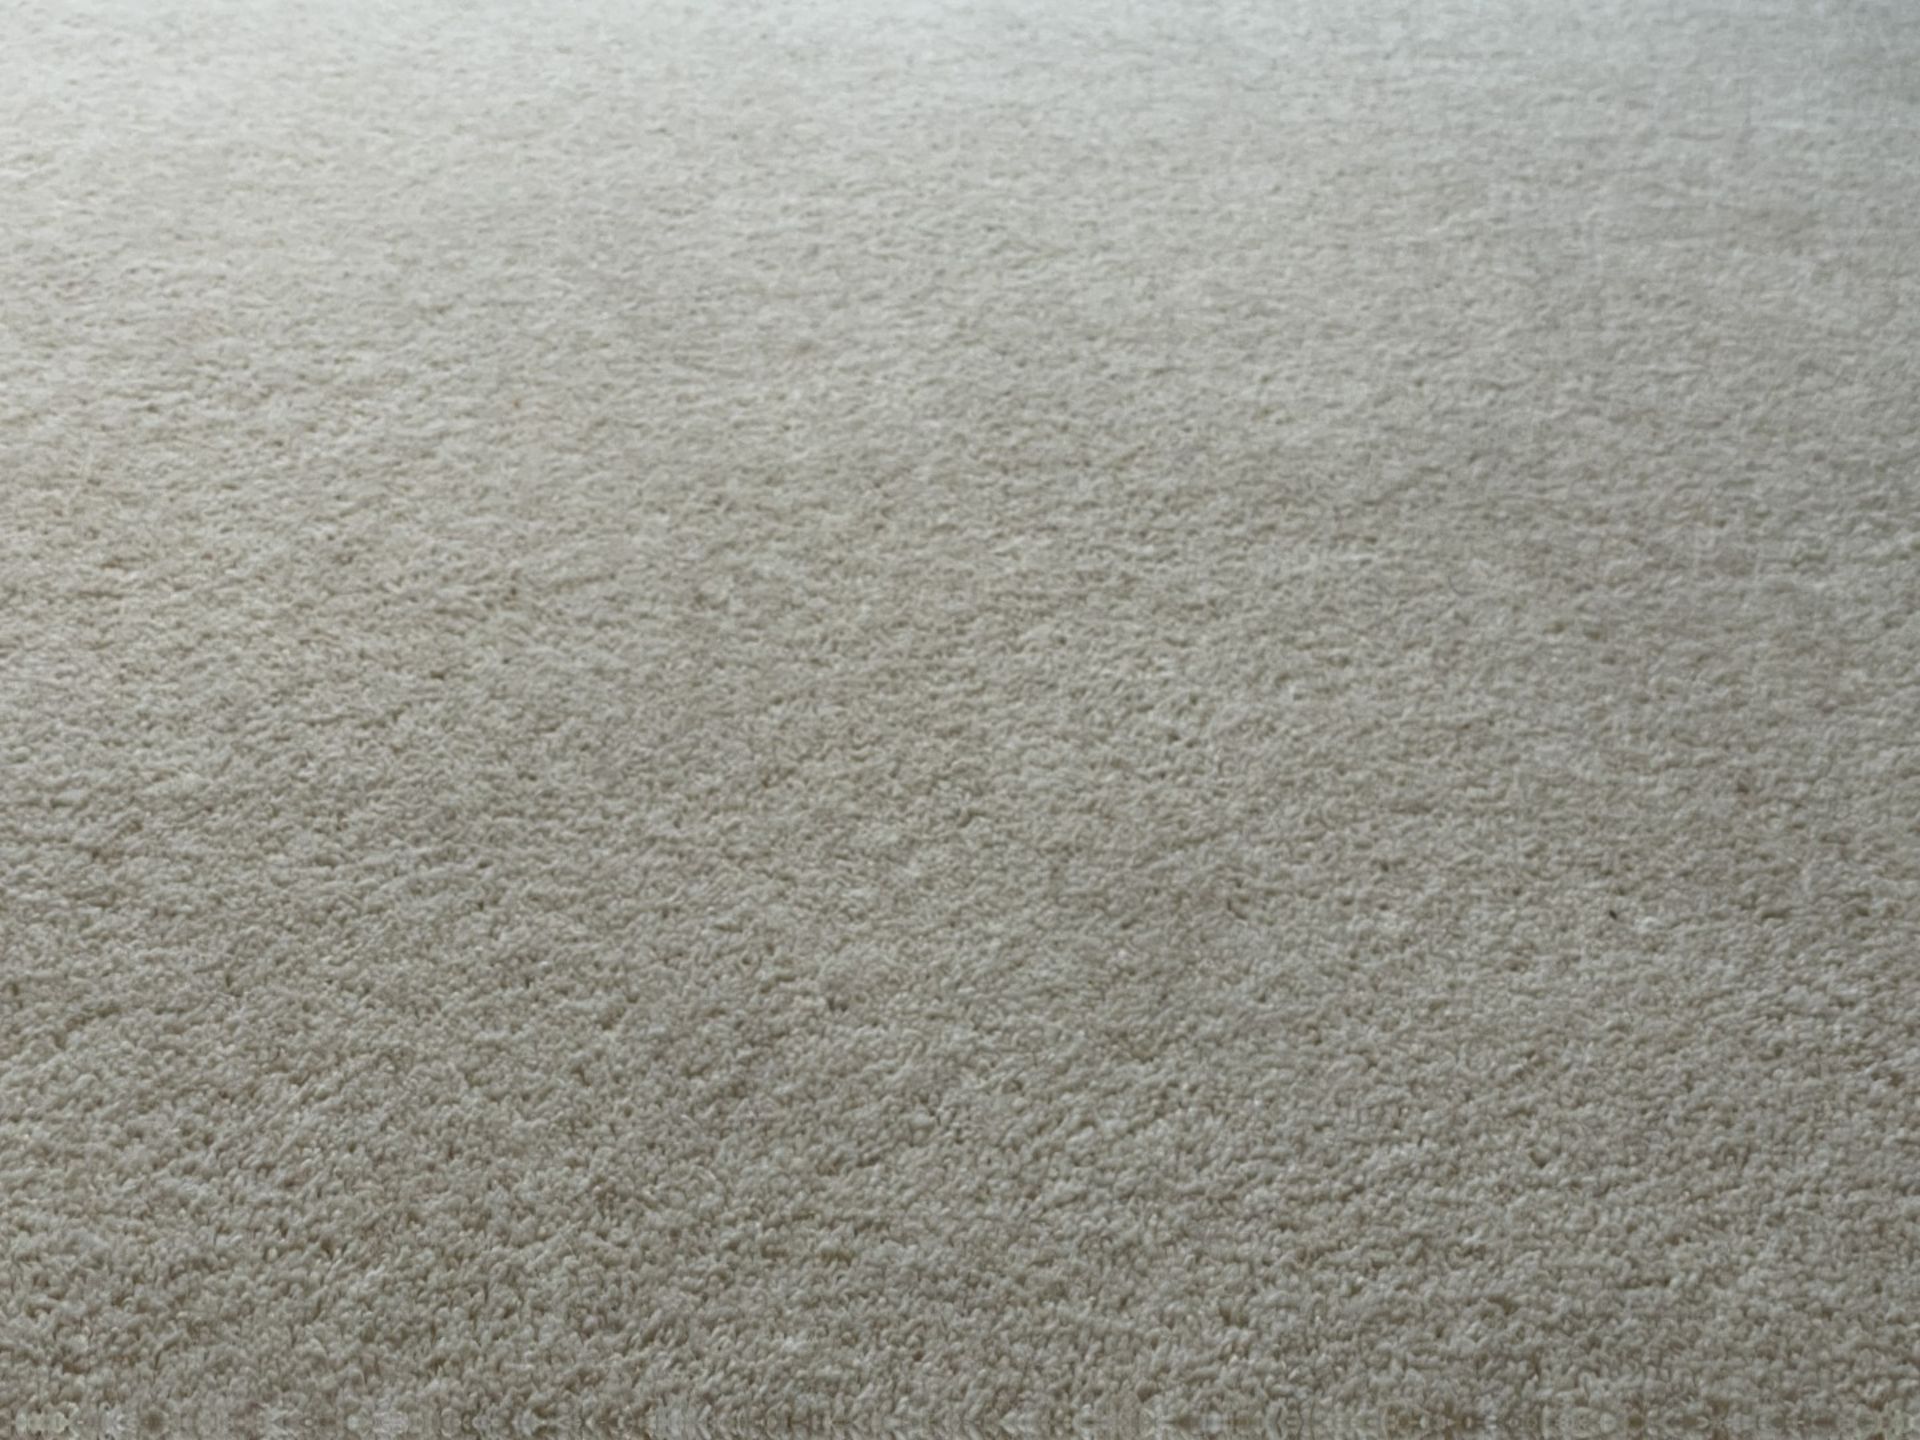 1 x Luxury Wool Bedroom + Dressing Room Carpets in a Neutral Tone with Premium Underlay - Image 10 of 12